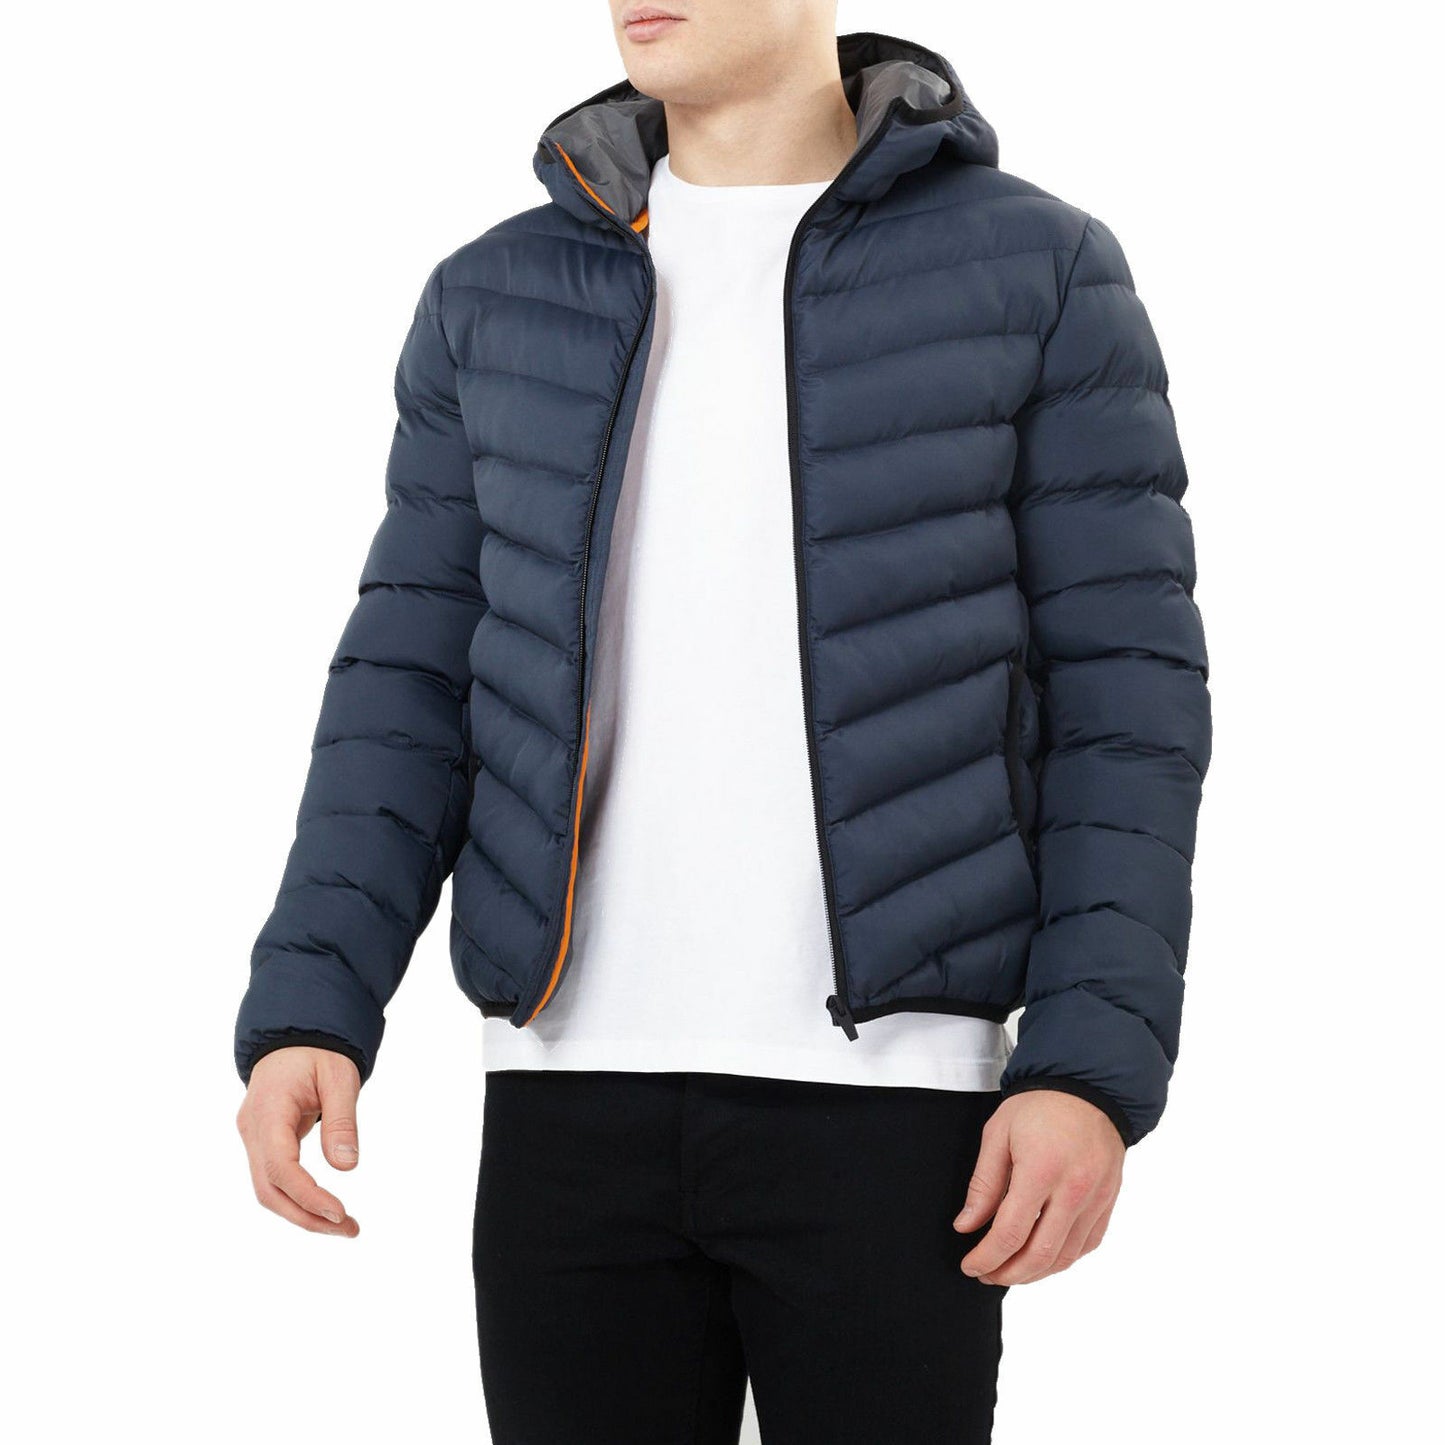 BRAVE SOUL MEN QUILTED HOODED JACKET PADDED BUBBLE PUFFER PUFFA WARM BOMBER COAT